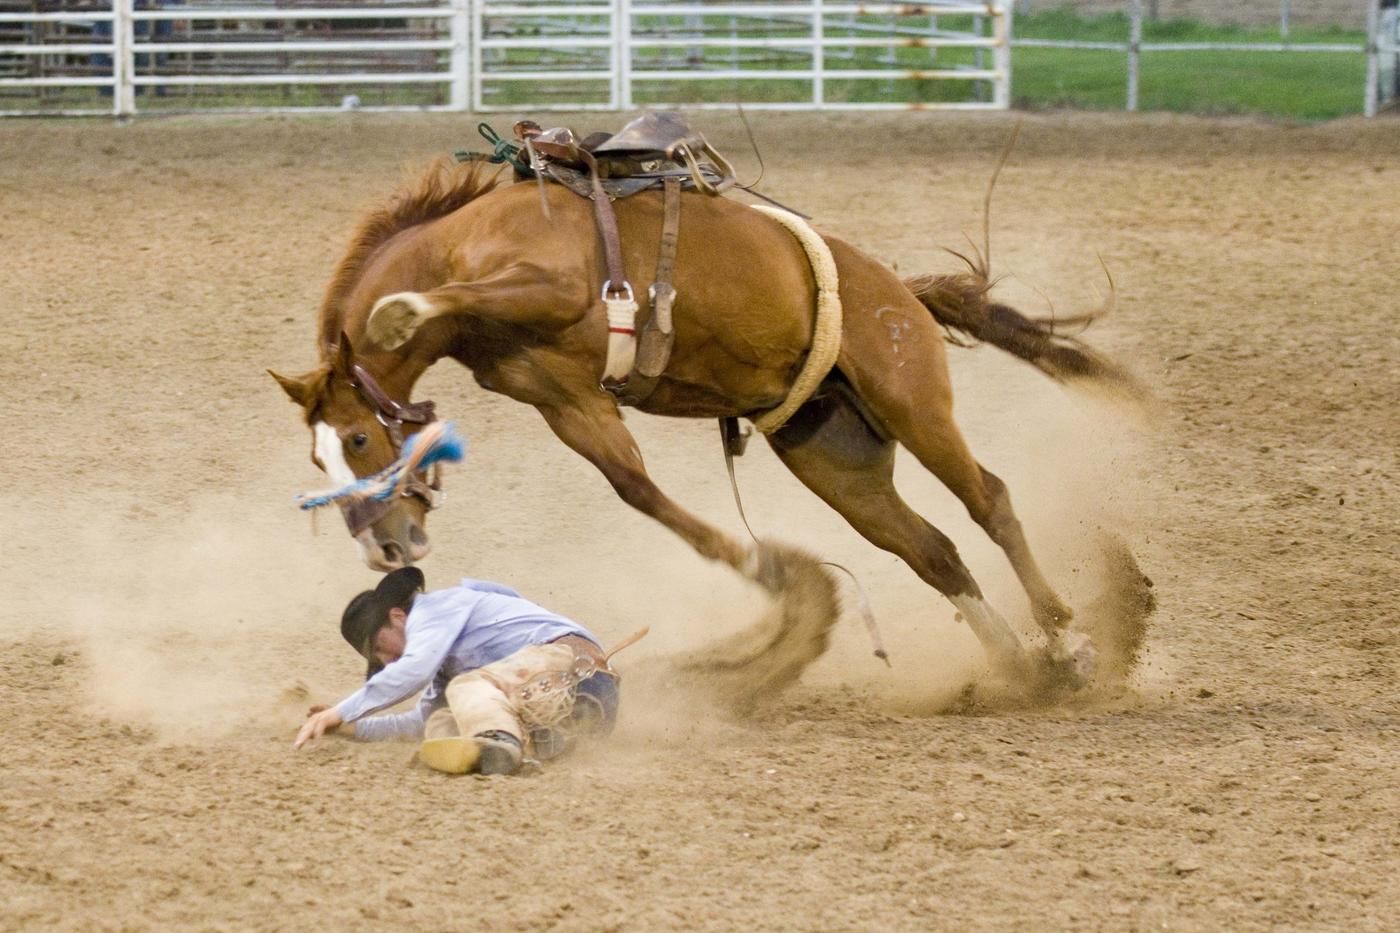 pro rodeo cowboy on horse jumping over him